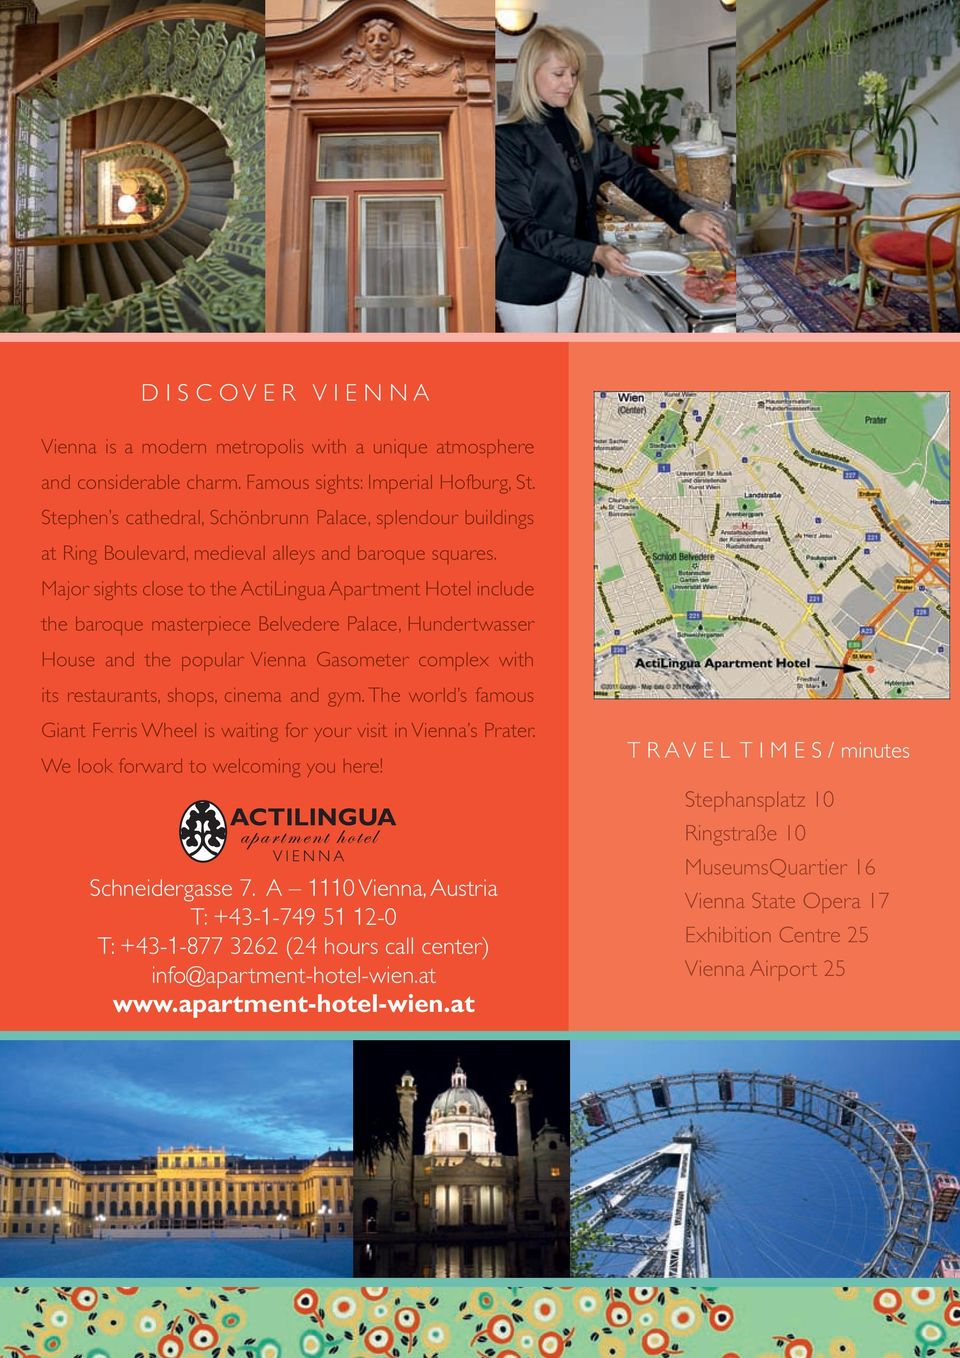 Major sights close to the ActiLingua Apartment Hotel include the baroque masterpiece Belvedere Palace, Hundertwasser House and the popular Vienna Gasometer complex with its restaurants, shops, cinema